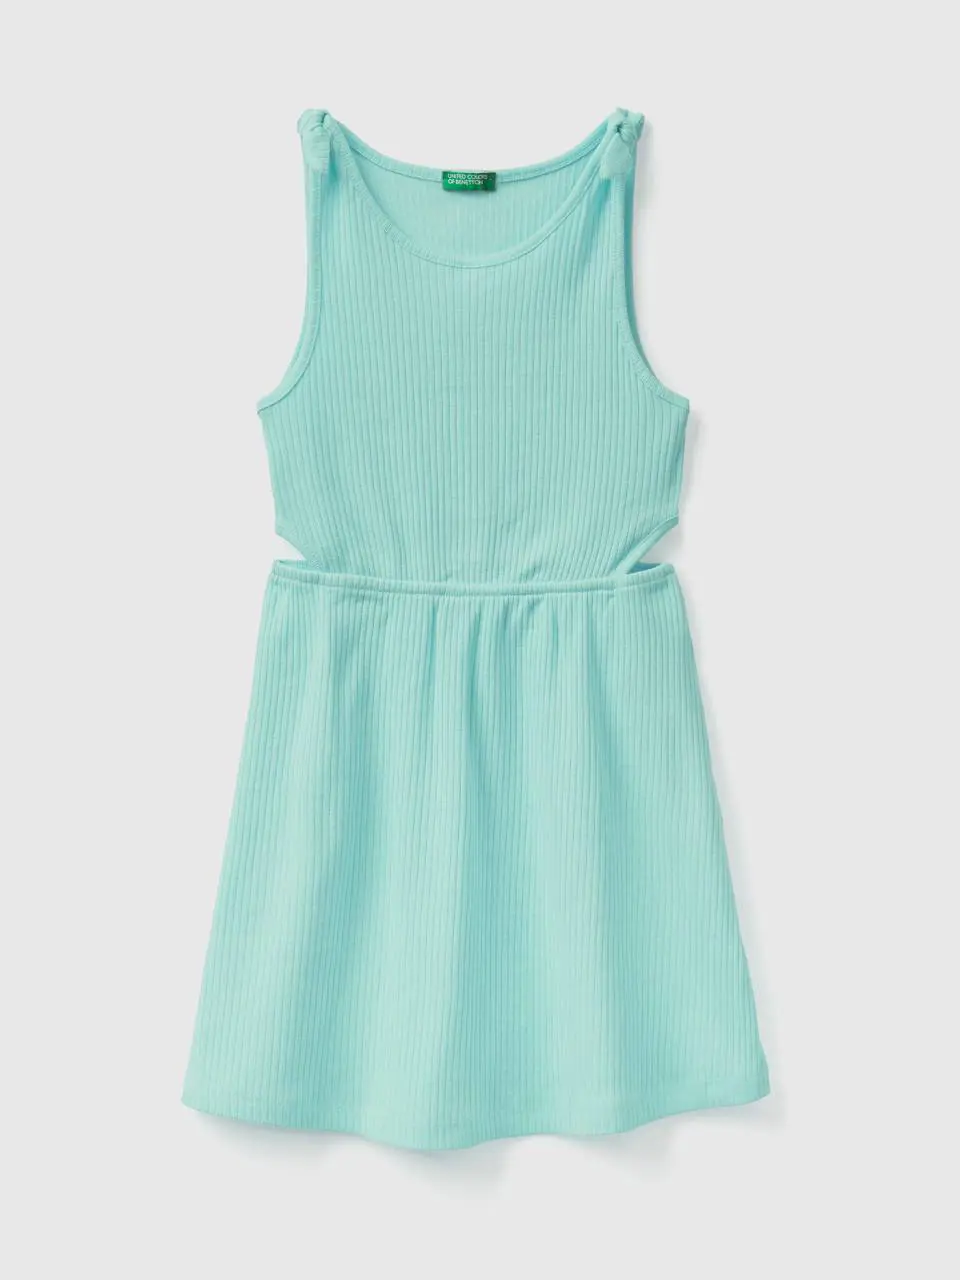 Benetton ribbed dress with shoulder straps. 1